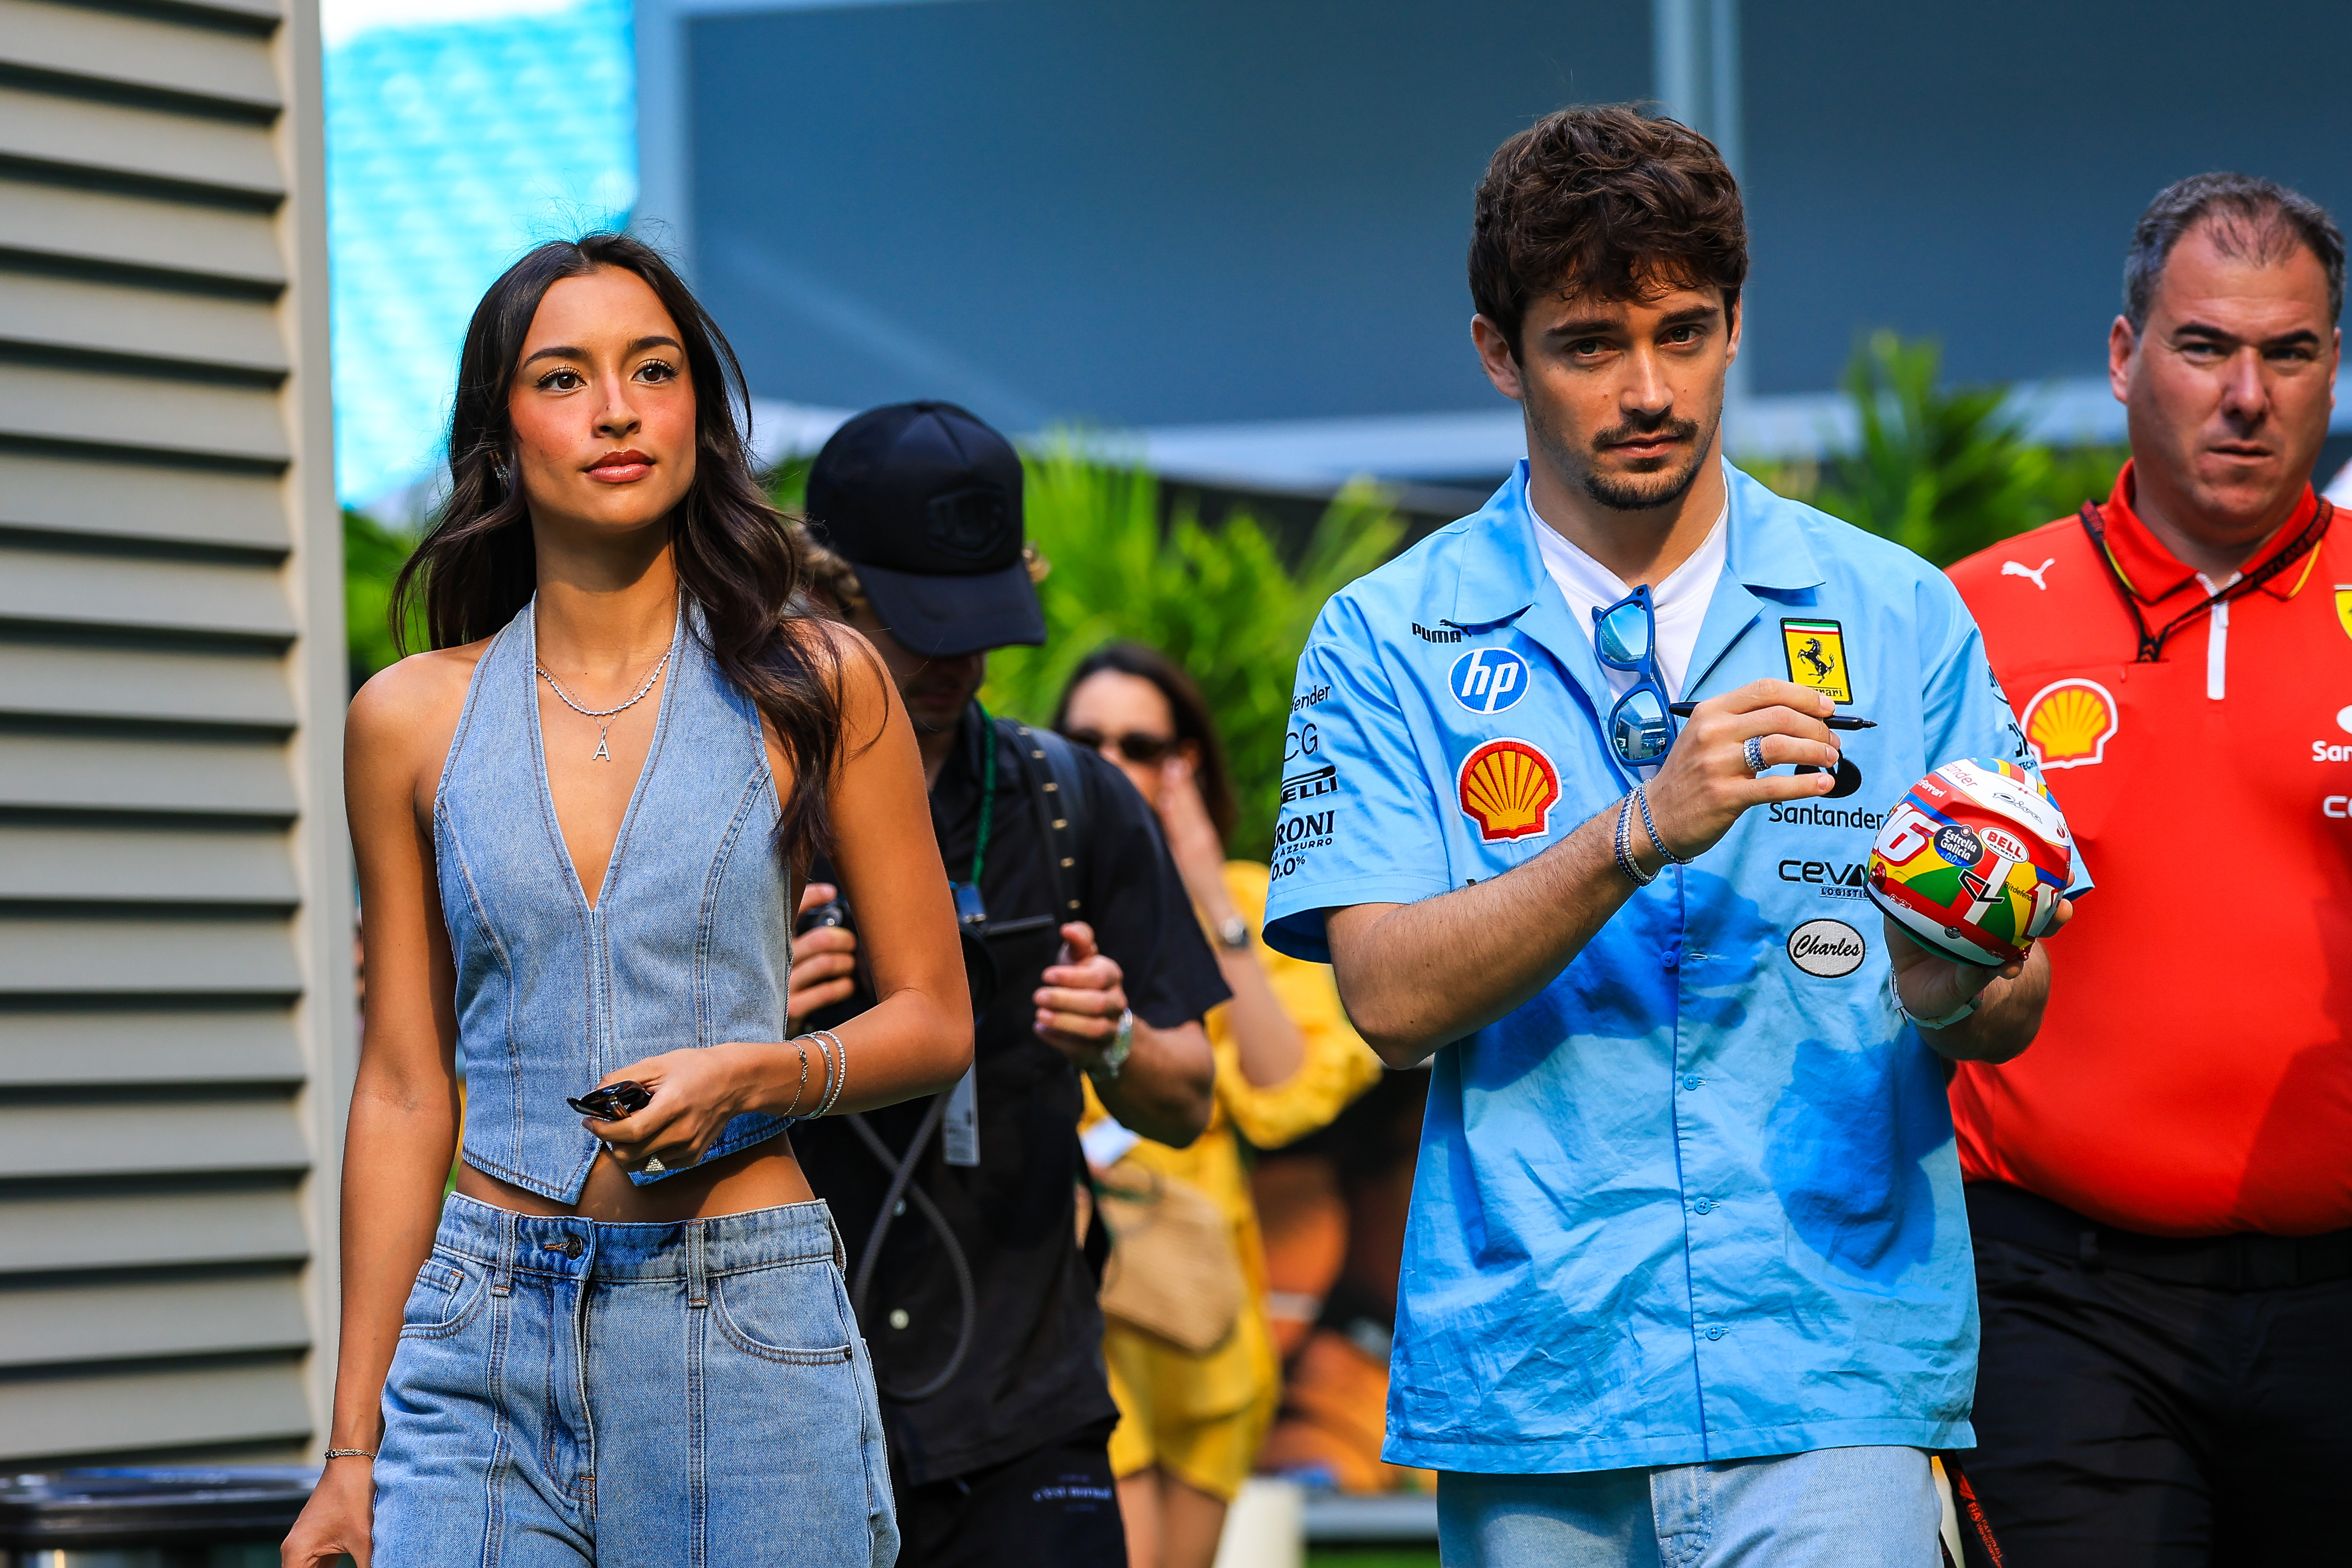 Charles Leclerc had his girlfriend Alexandra Saint Mleux by his side